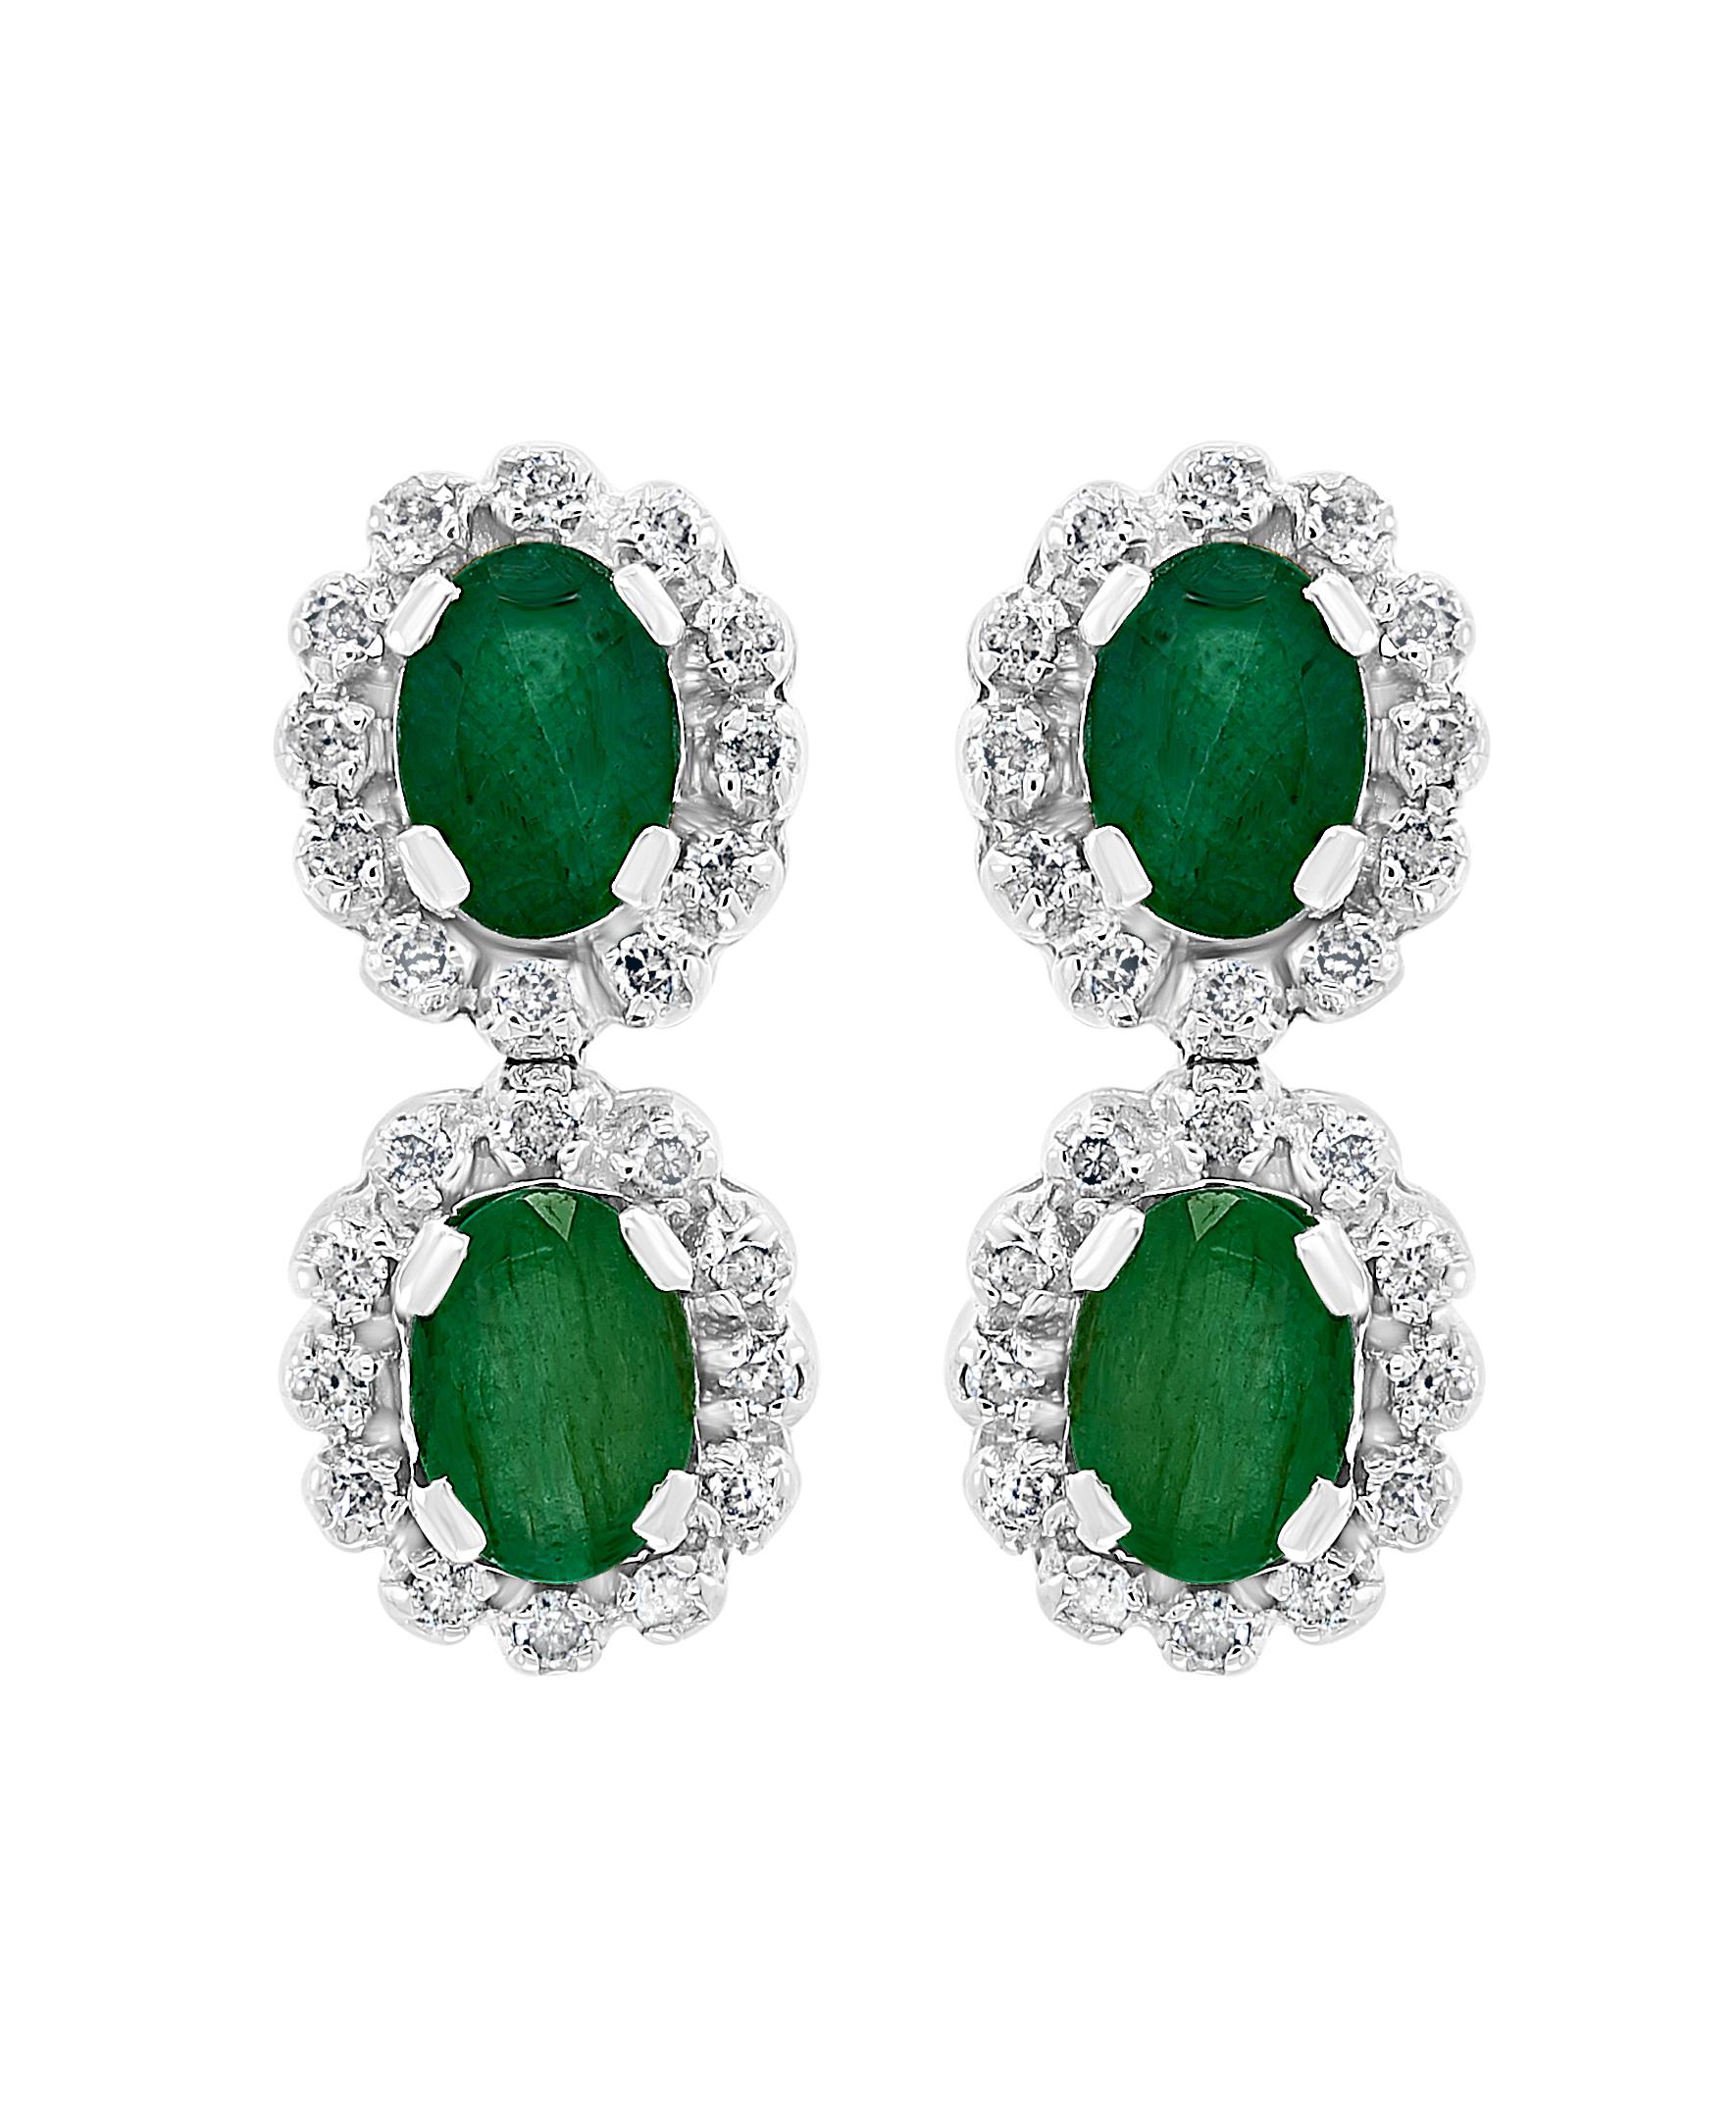 60 Ct Oval Brazilian Emerald & 7.5 Ct Diamond Necklace Earring  Suite 14 Karat white Gold
Oval  Shape Brazilian   Emerald And Diamond   Necklace    and Earring  Bridal Suite Estate
Bracelet is not with the set
Natural Emerald & diamond necklace of